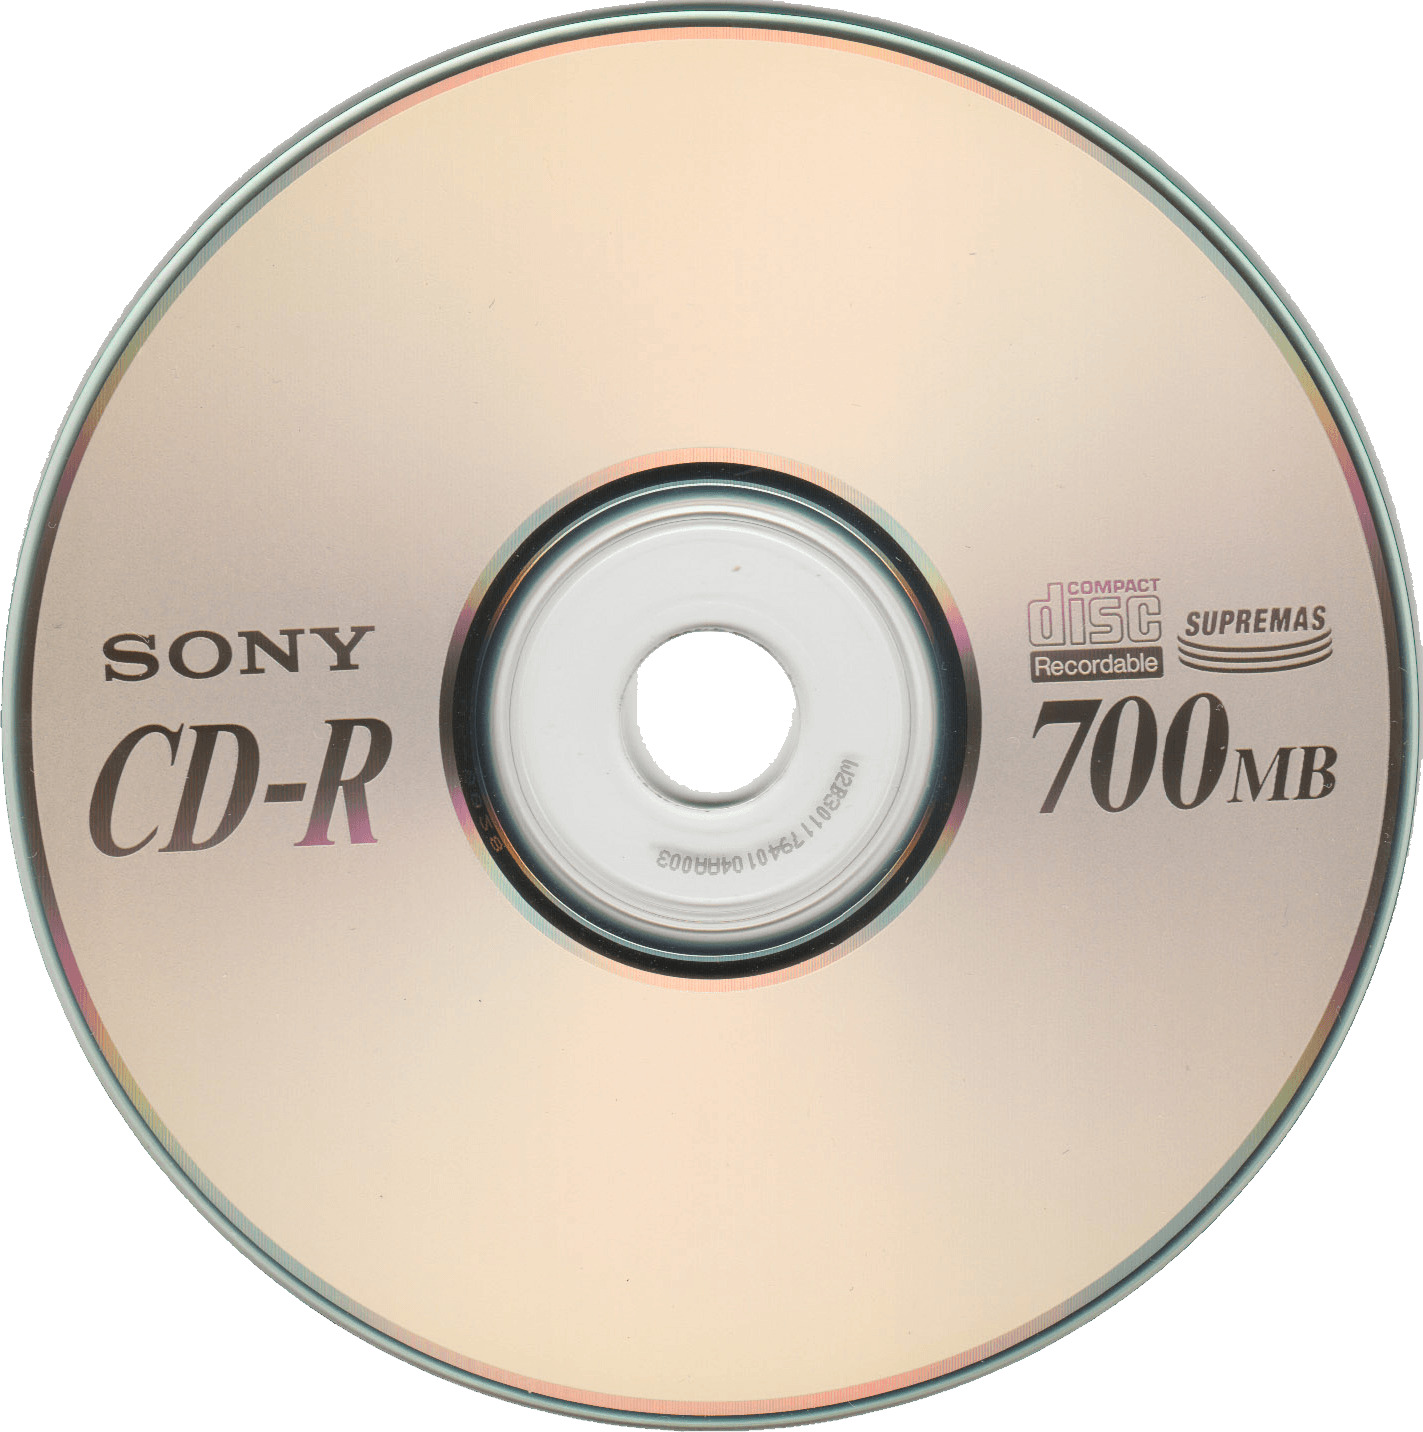 Cdr Compact Disc png icons